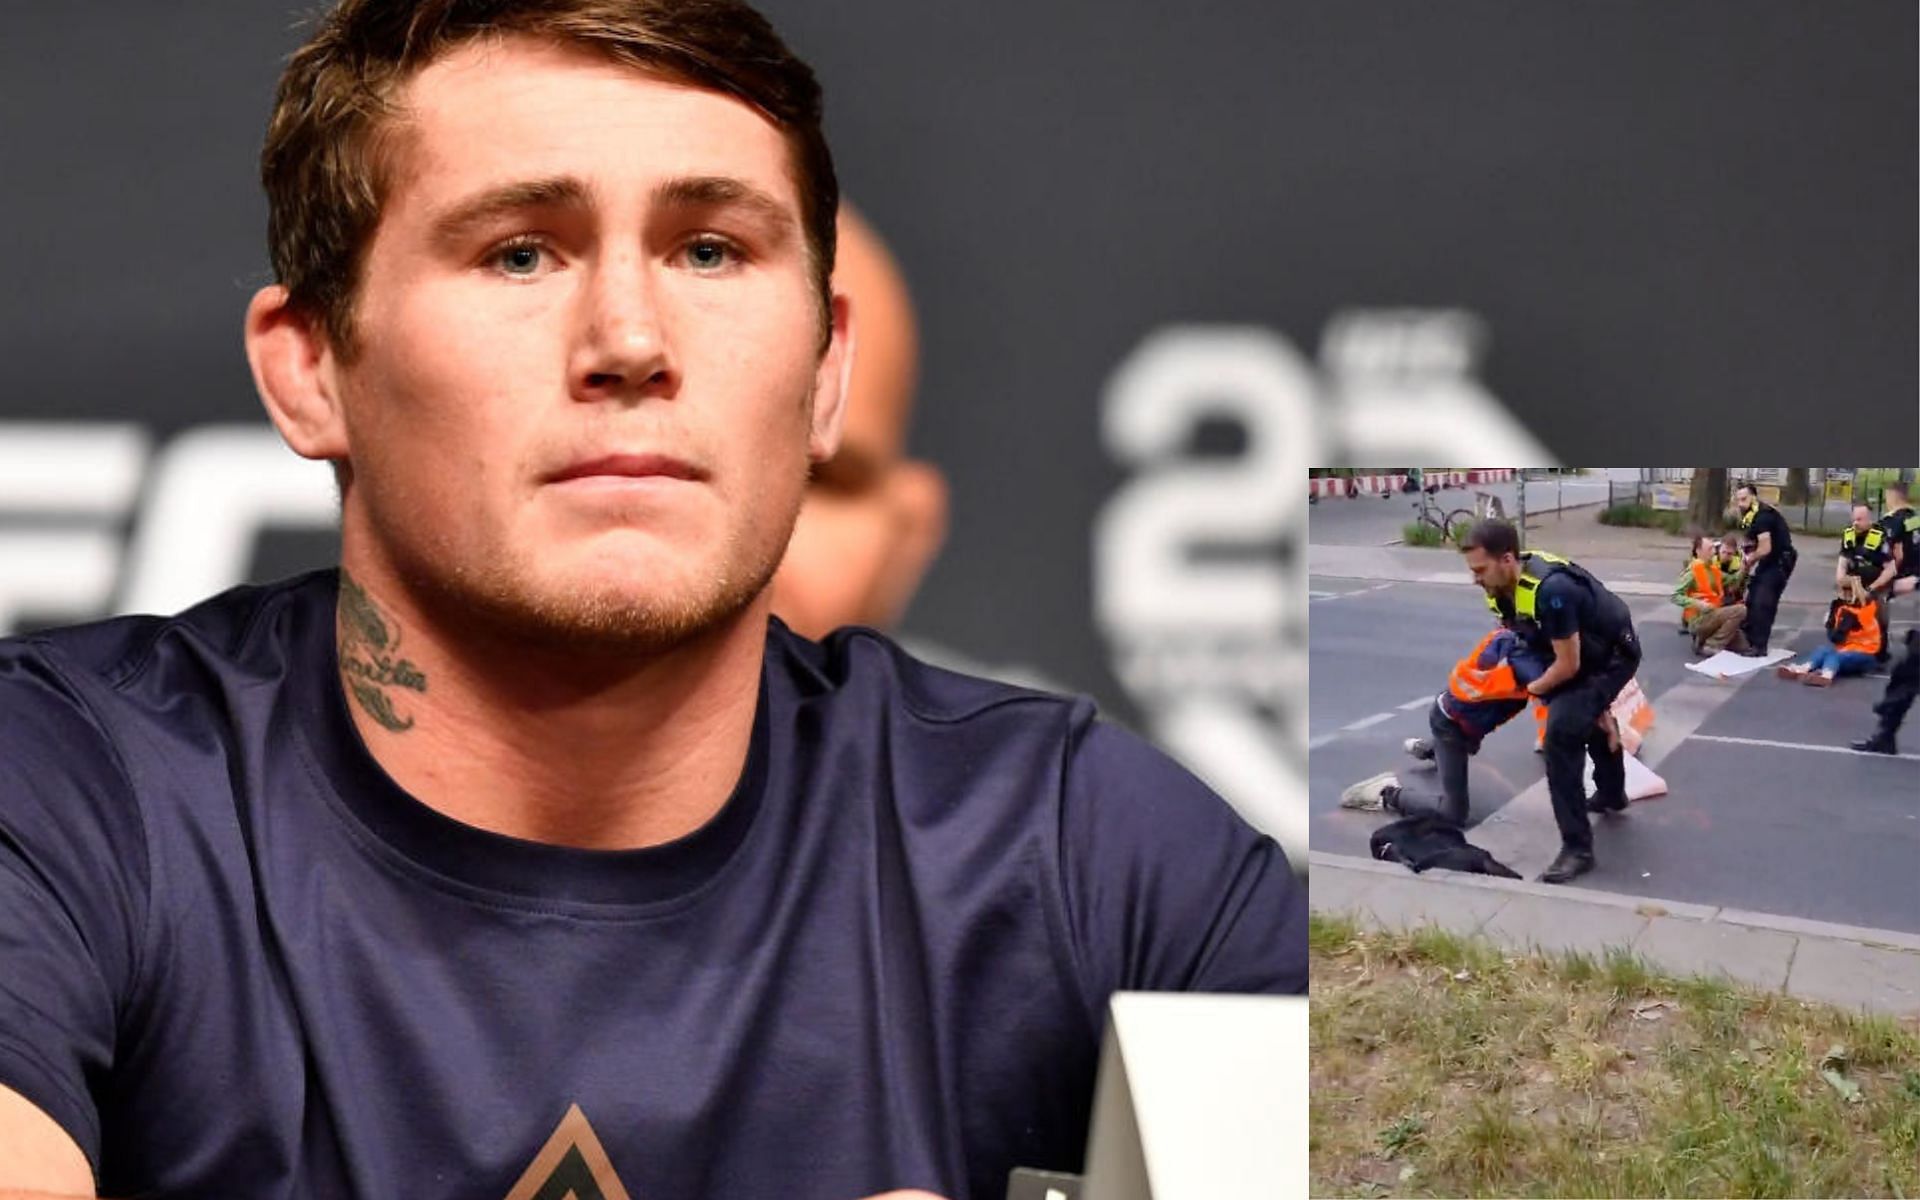 Darren Till, Screenshot of the police incident (Image courtesy - Yahoo Sports, @EssexPR on Twitter)